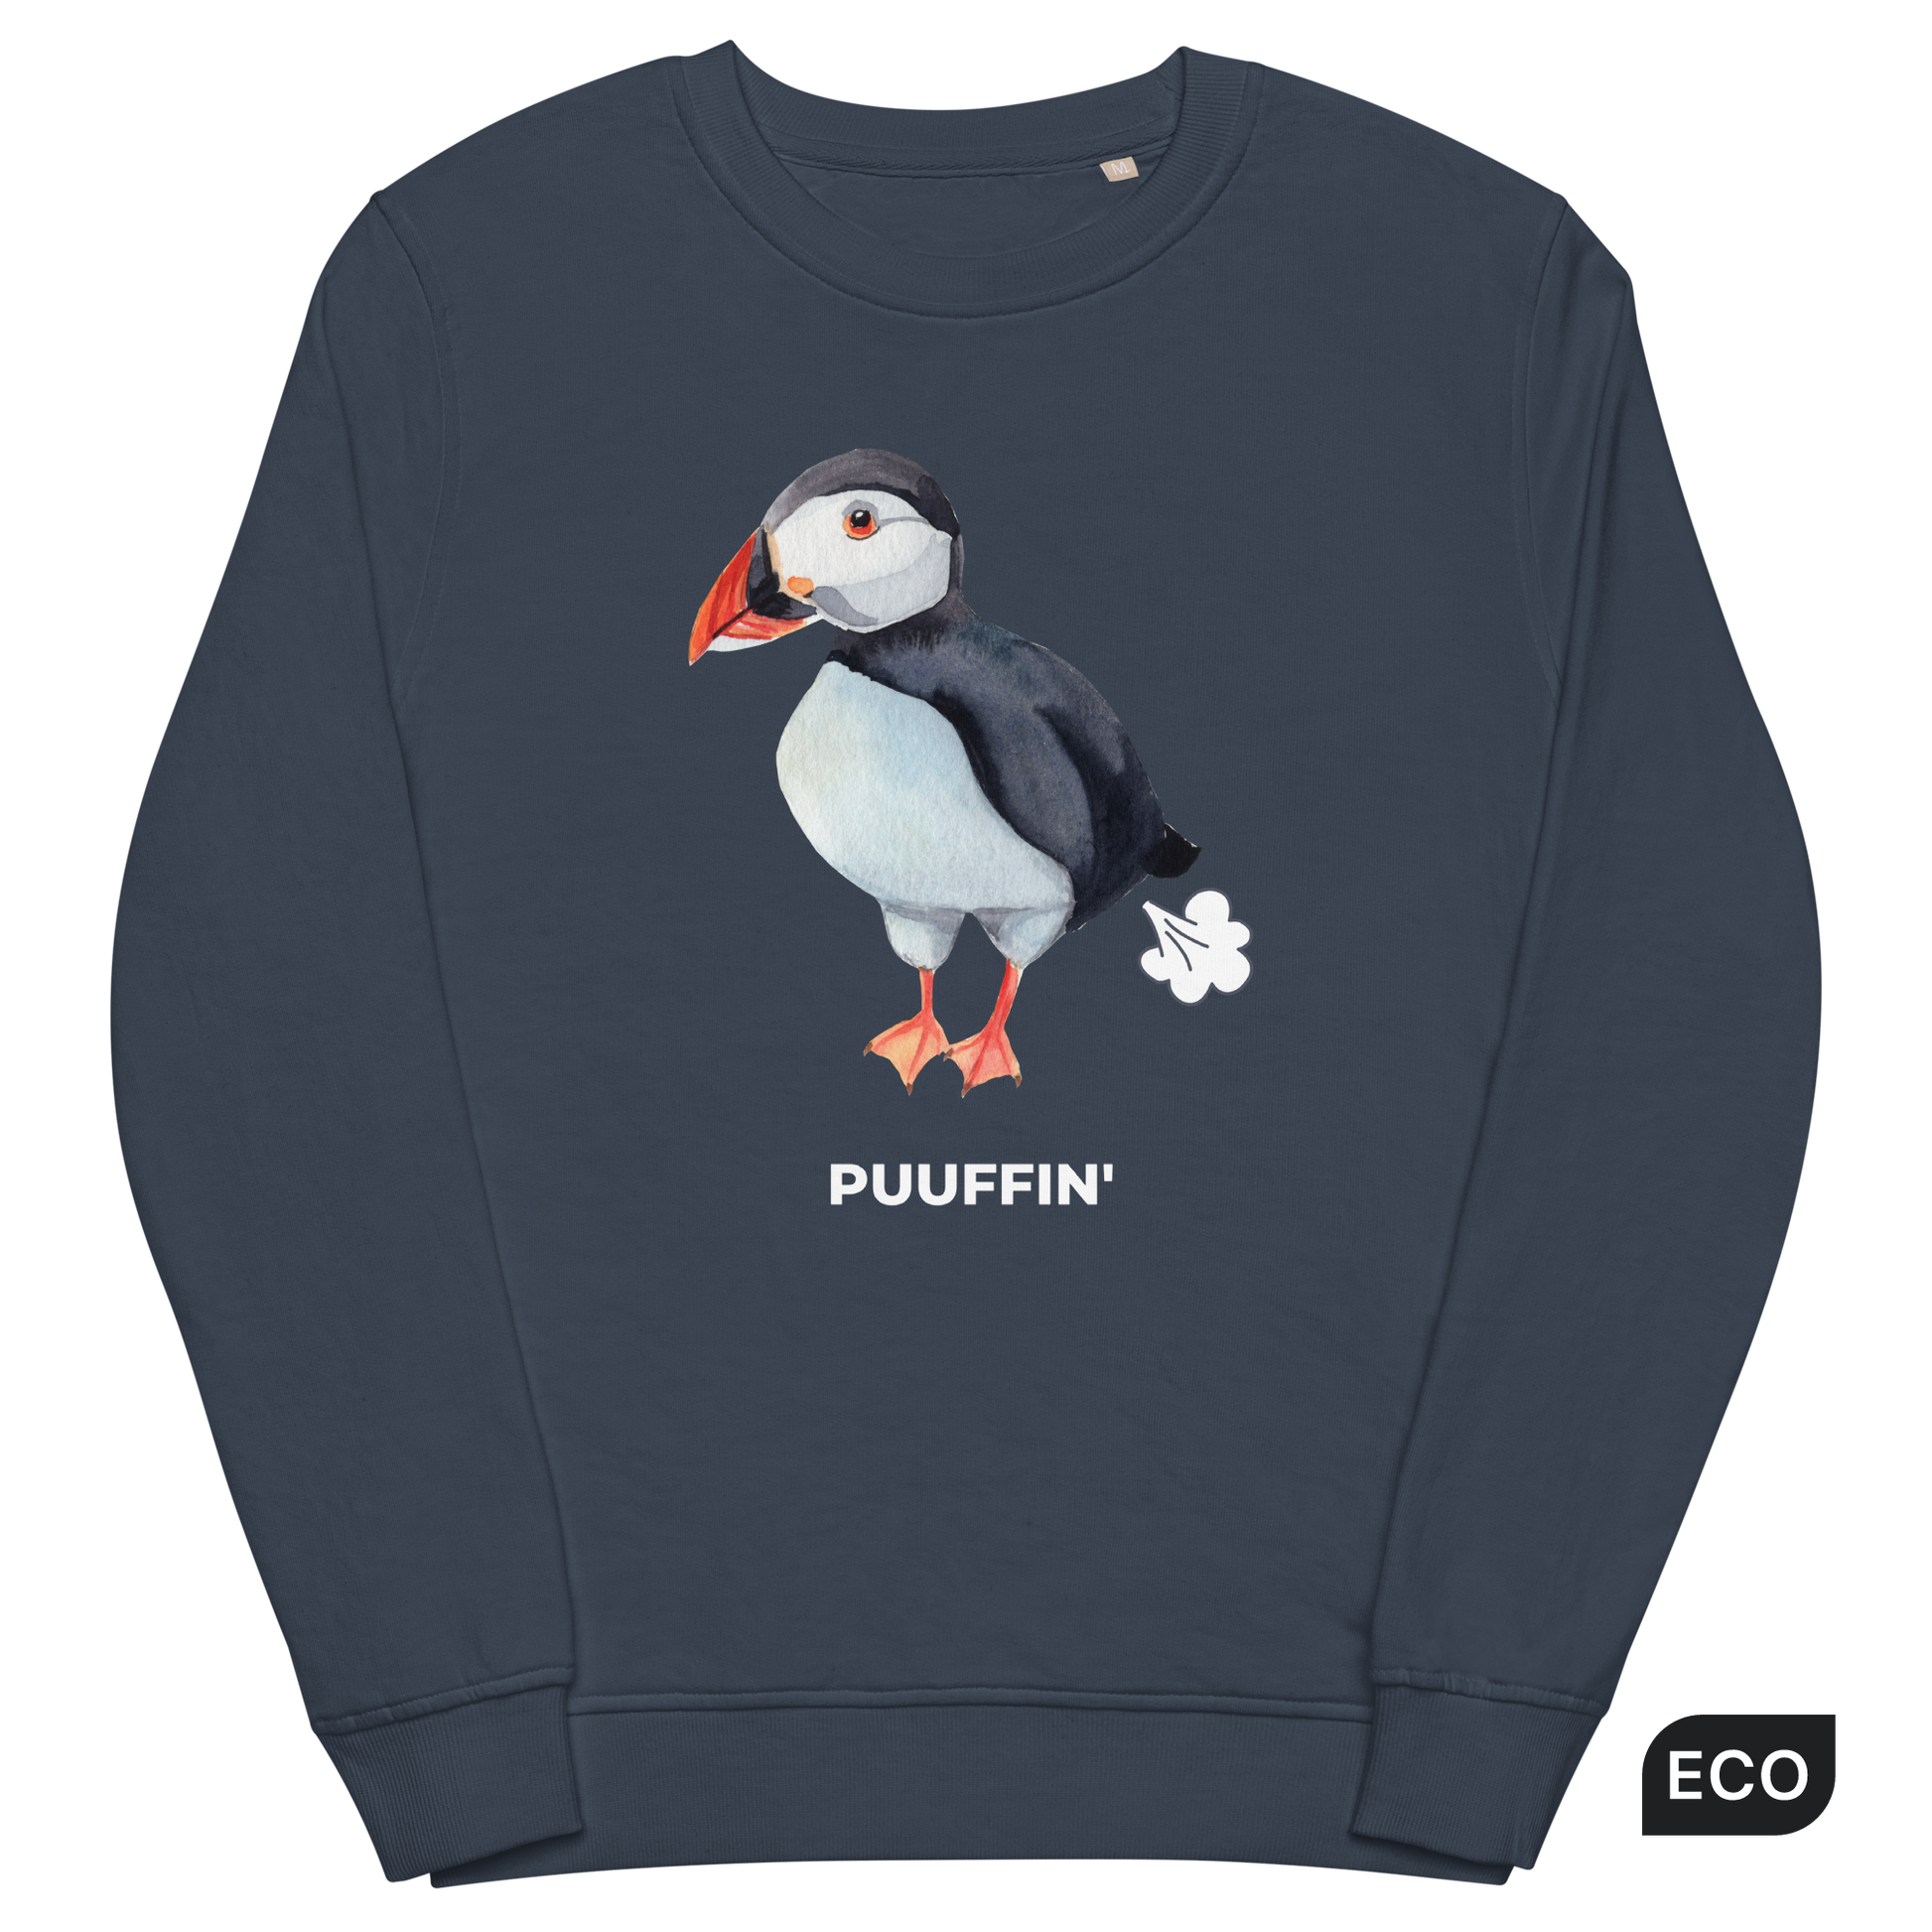 French Navy Organic Cotton Puffin Sweatshirt featuring a comic Puuffin' graphic on the chest - Funny Graphic Puffin Sweatshirts - Boozy Fox